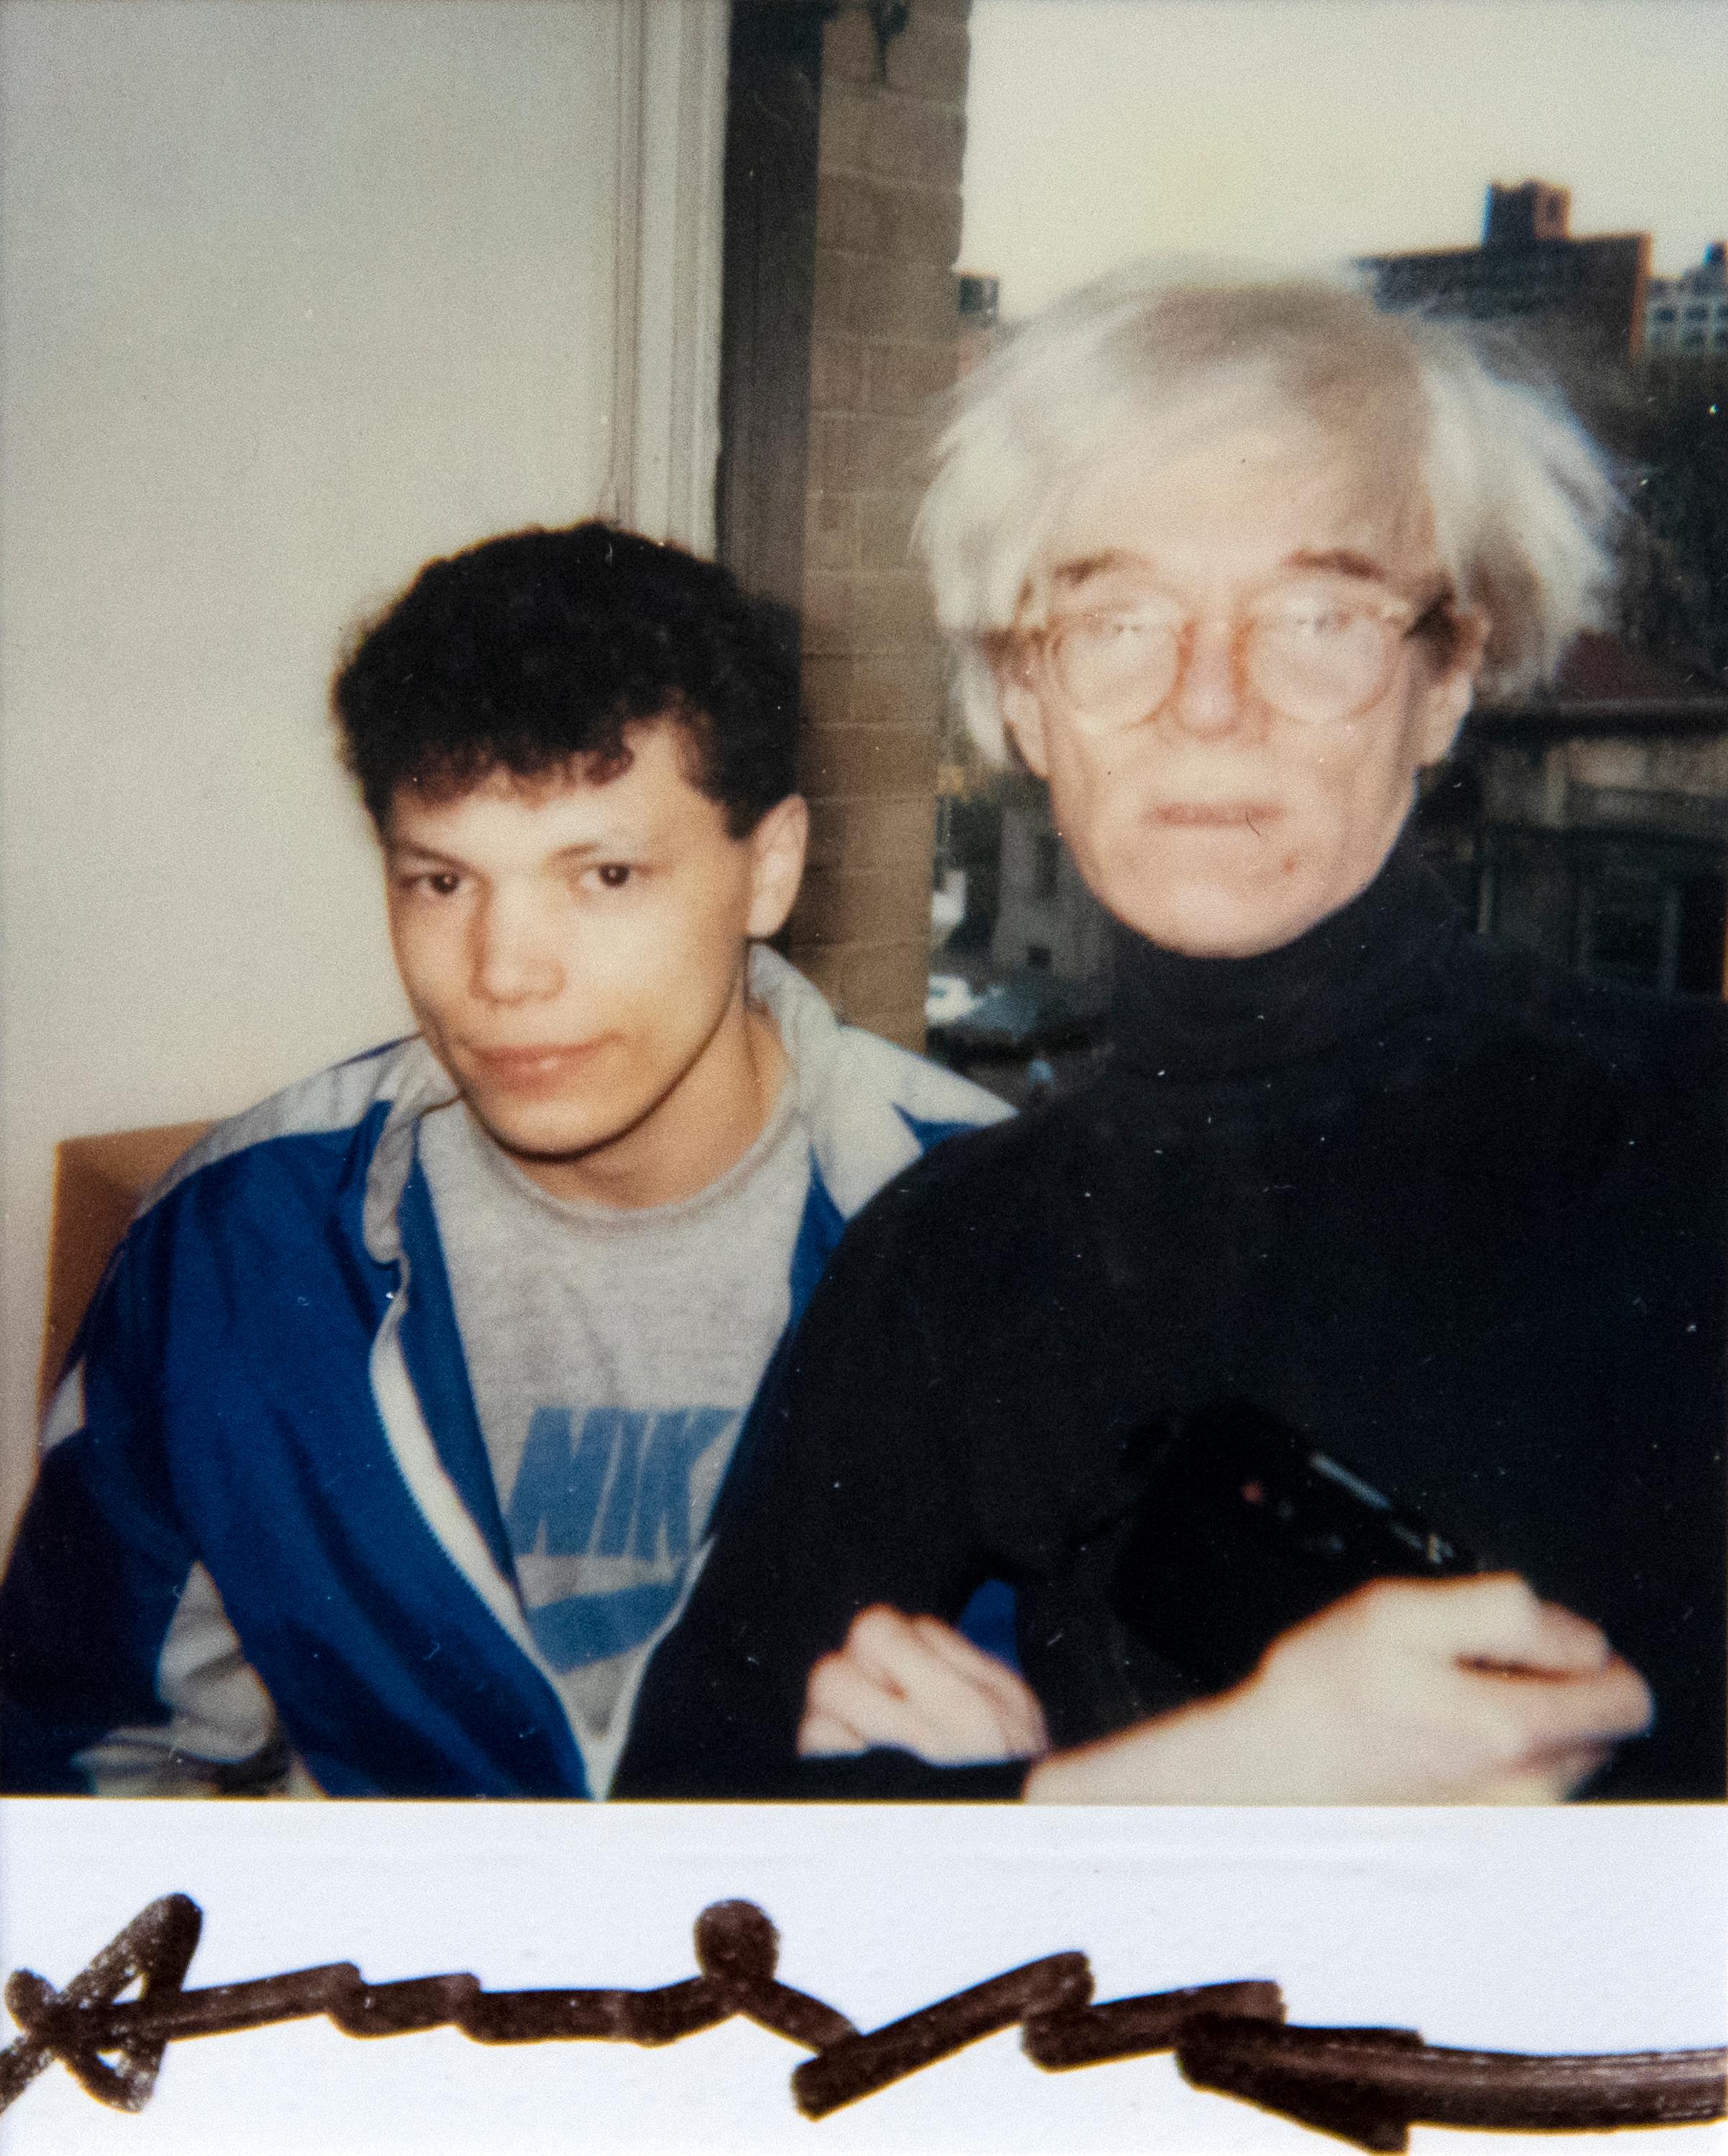 A photograph by Andy Warhol. "Andy Warhol and Unidentified Man" is a Polaroid, Polacolor by pop American artist Andy Warhol. The artwork is signed in the lower middle, "Andy Warhol", and is numbered FB01.00083 and AWL213.
Andy Warhol — who famously